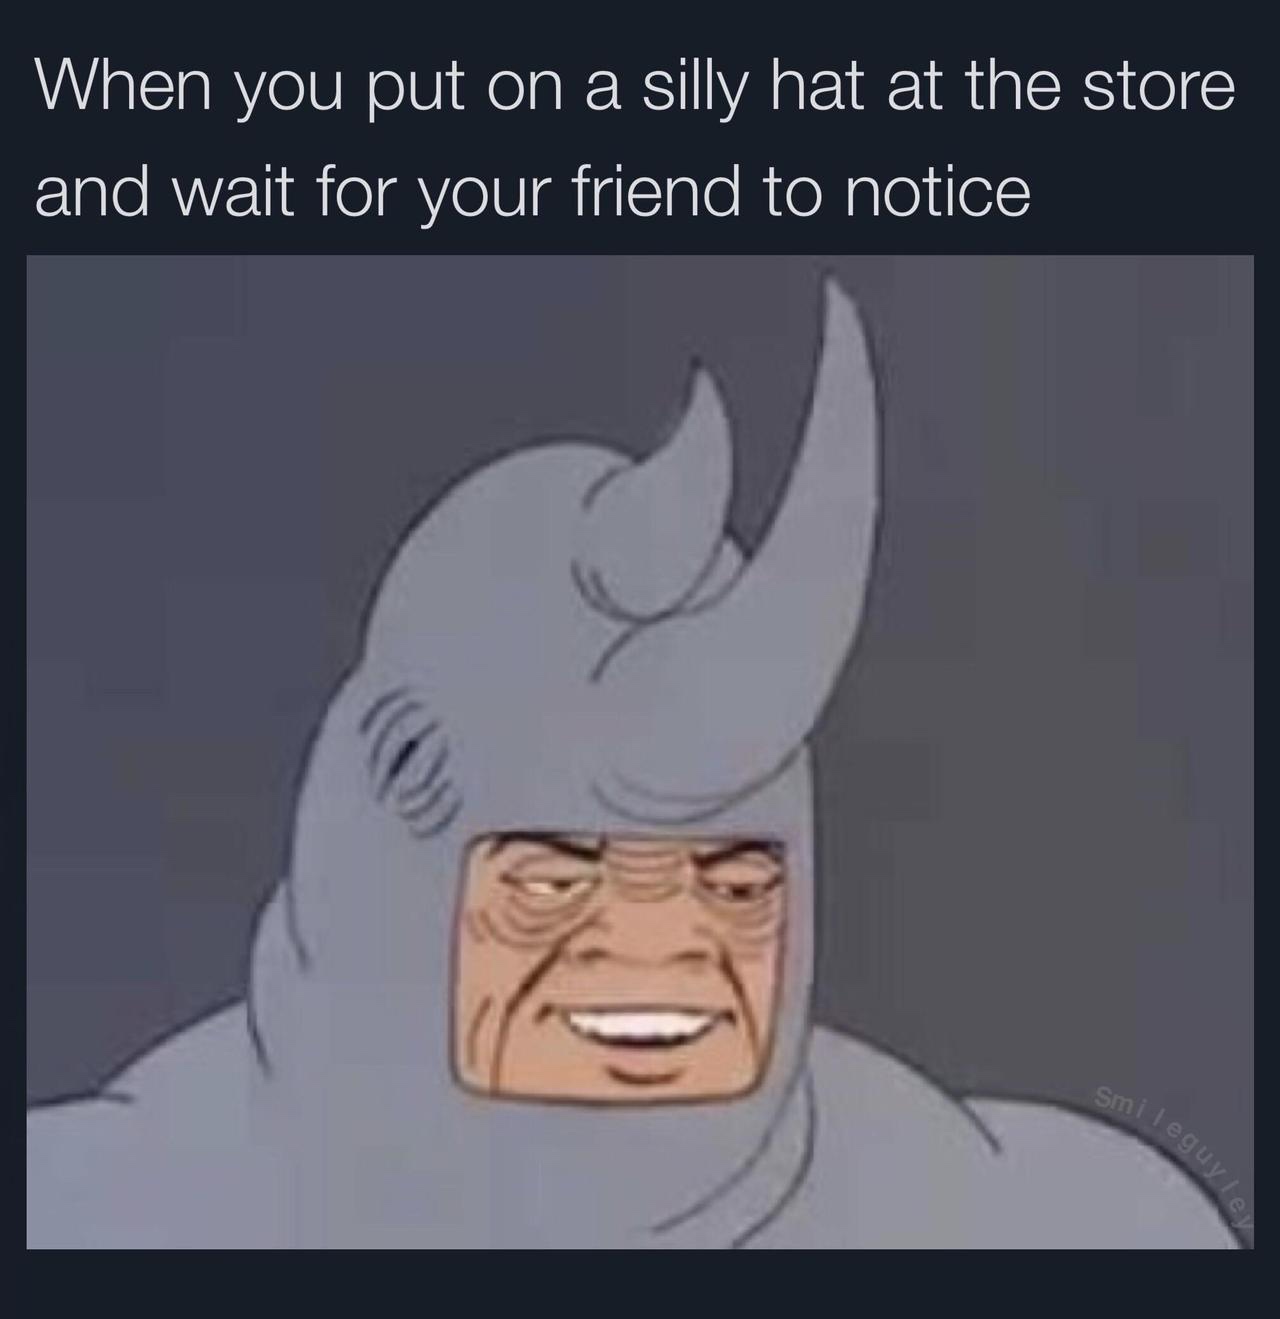 friday 13 - you put on a silly hat - When you put on a silly hat at the store and wait for your friend to notice smilegur